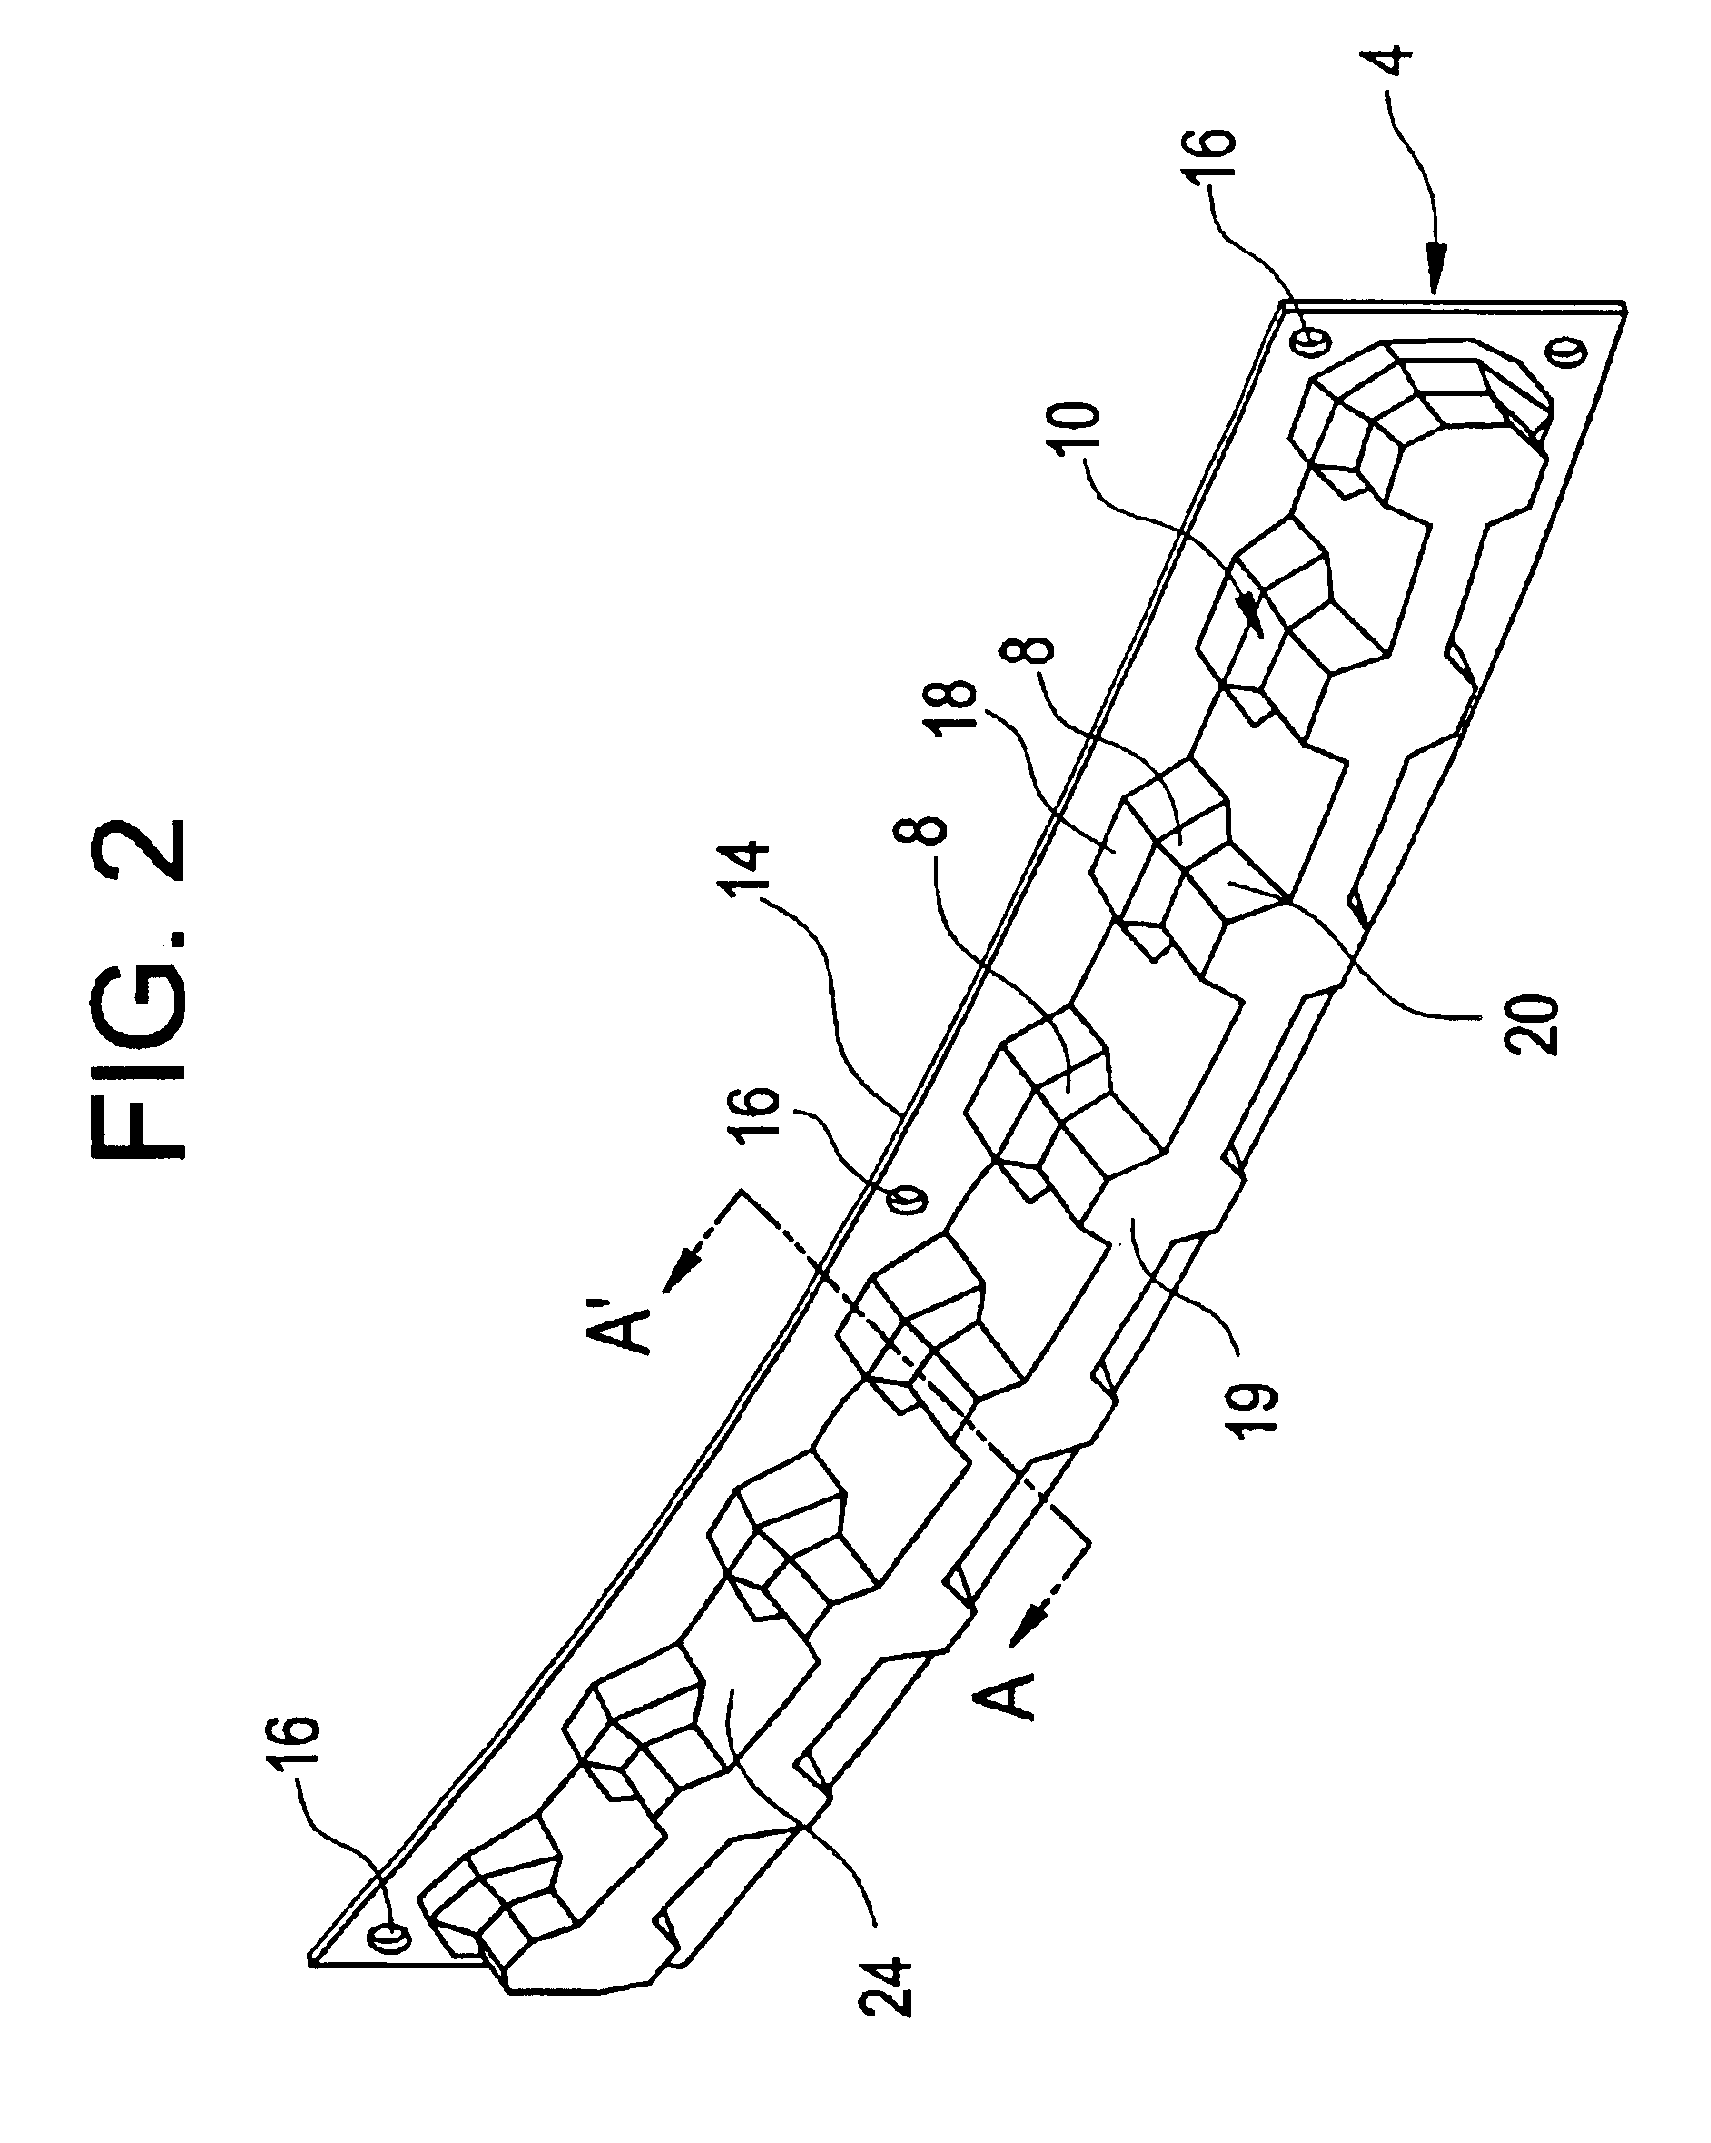 Pedestrian energy absorber for automotive vehicles